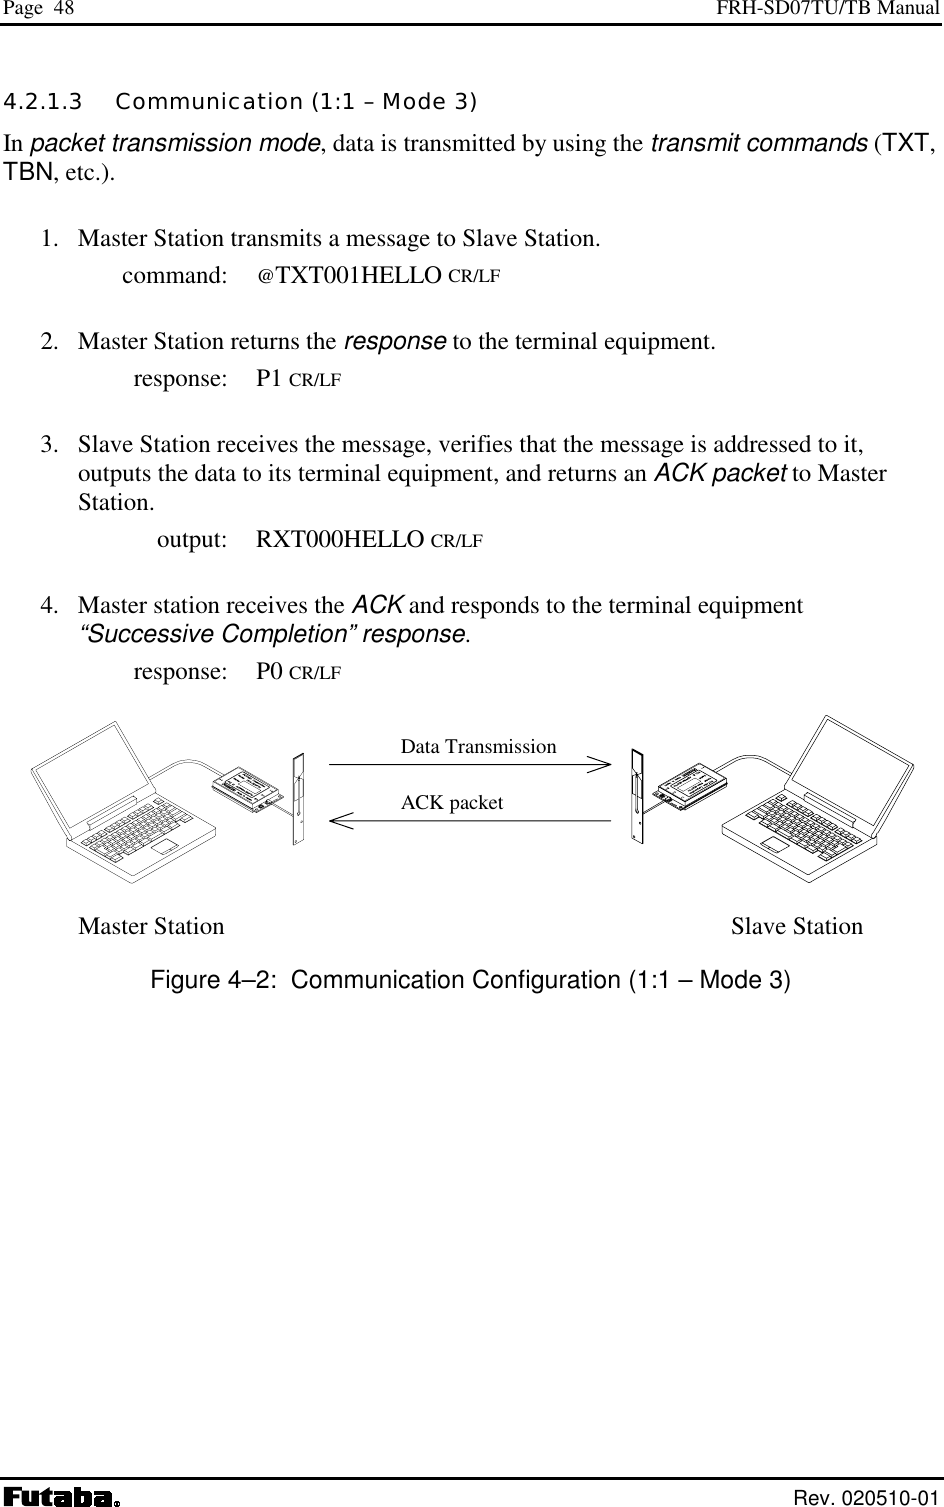 Page  48  FRH-SD07TU/TB Manual  Rev. 020510-01 4.2.1.3   Communication (1:1 – Mode 3) In packet transmission mode, data is transmitted by using the transmit commands (TXT, TBN, etc.).   1.  Master Station transmits a message to Slave Station.  command: @TXT001HELLO CR/LF   2.  Master Station returns the response to the terminal equipment.  response: P1 CR/LF   3.  Slave Station receives the message, verifies that the message is addressed to it, outputs the data to its terminal equipment, and returns an ACK packet to Master Station.  output: RXT000HELLO CR/LF   4.  Master station receives the ACK and responds to the terminal equipment “Successive Completion” response.  response: P0 CR/LF                                                         Master Station                                                                                 Slave Station Figure 4–2:  Communication Configuration (1:1 – Mode 3) Data Transmission ACK packet 